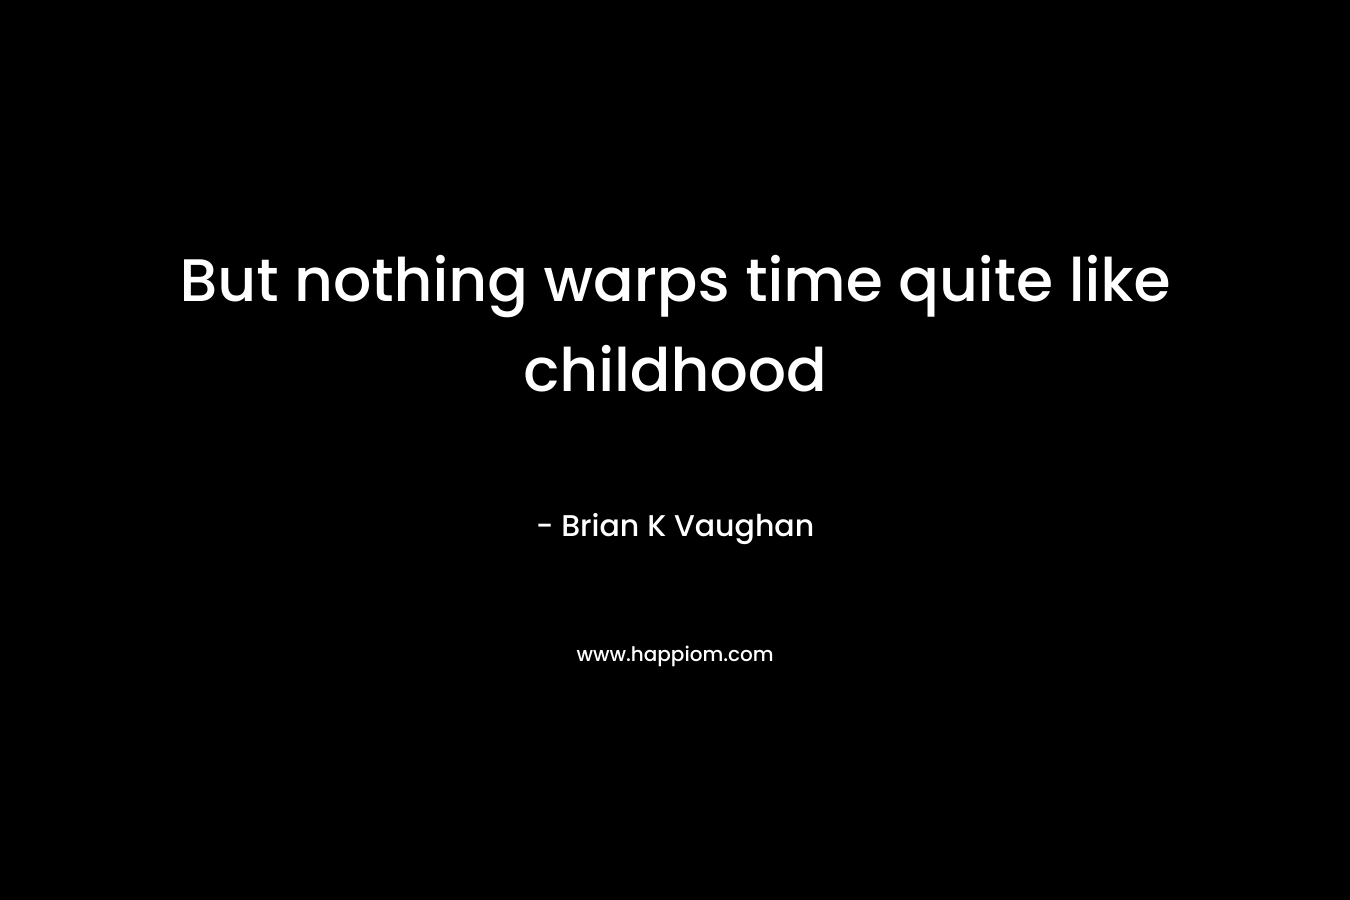 But nothing warps time quite like childhood